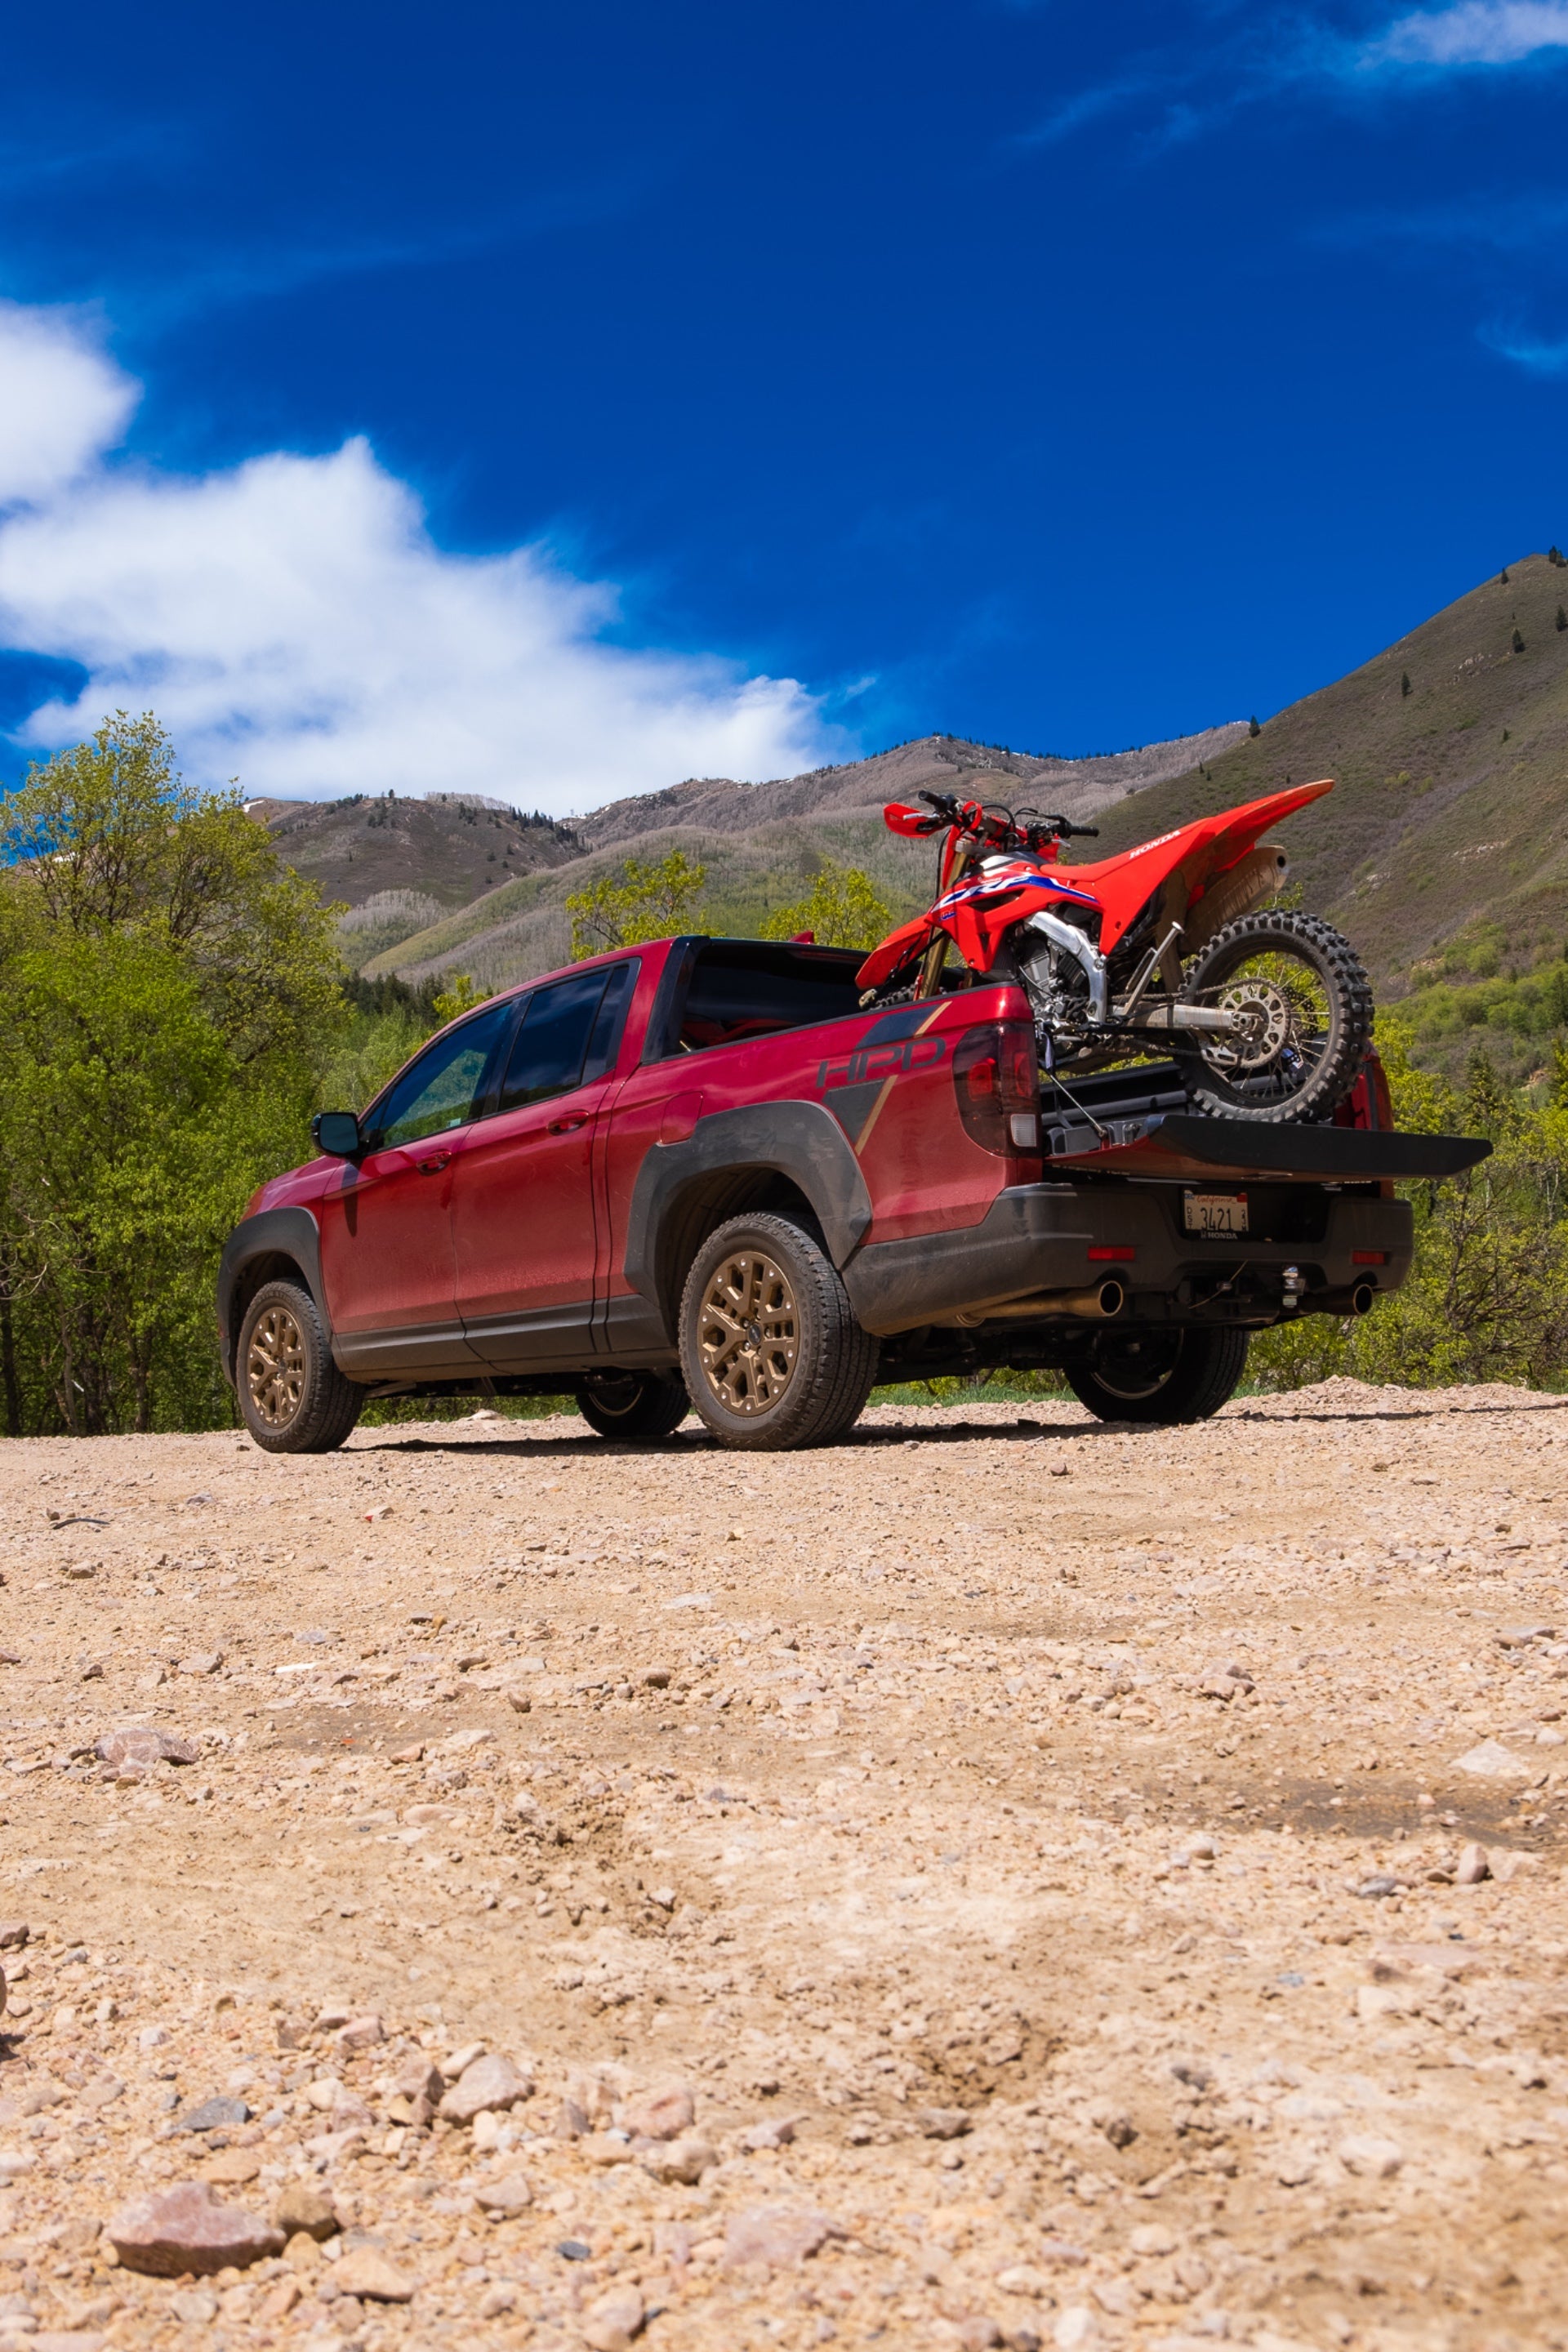 The Ridgeline with a CRF450RX in the bed.